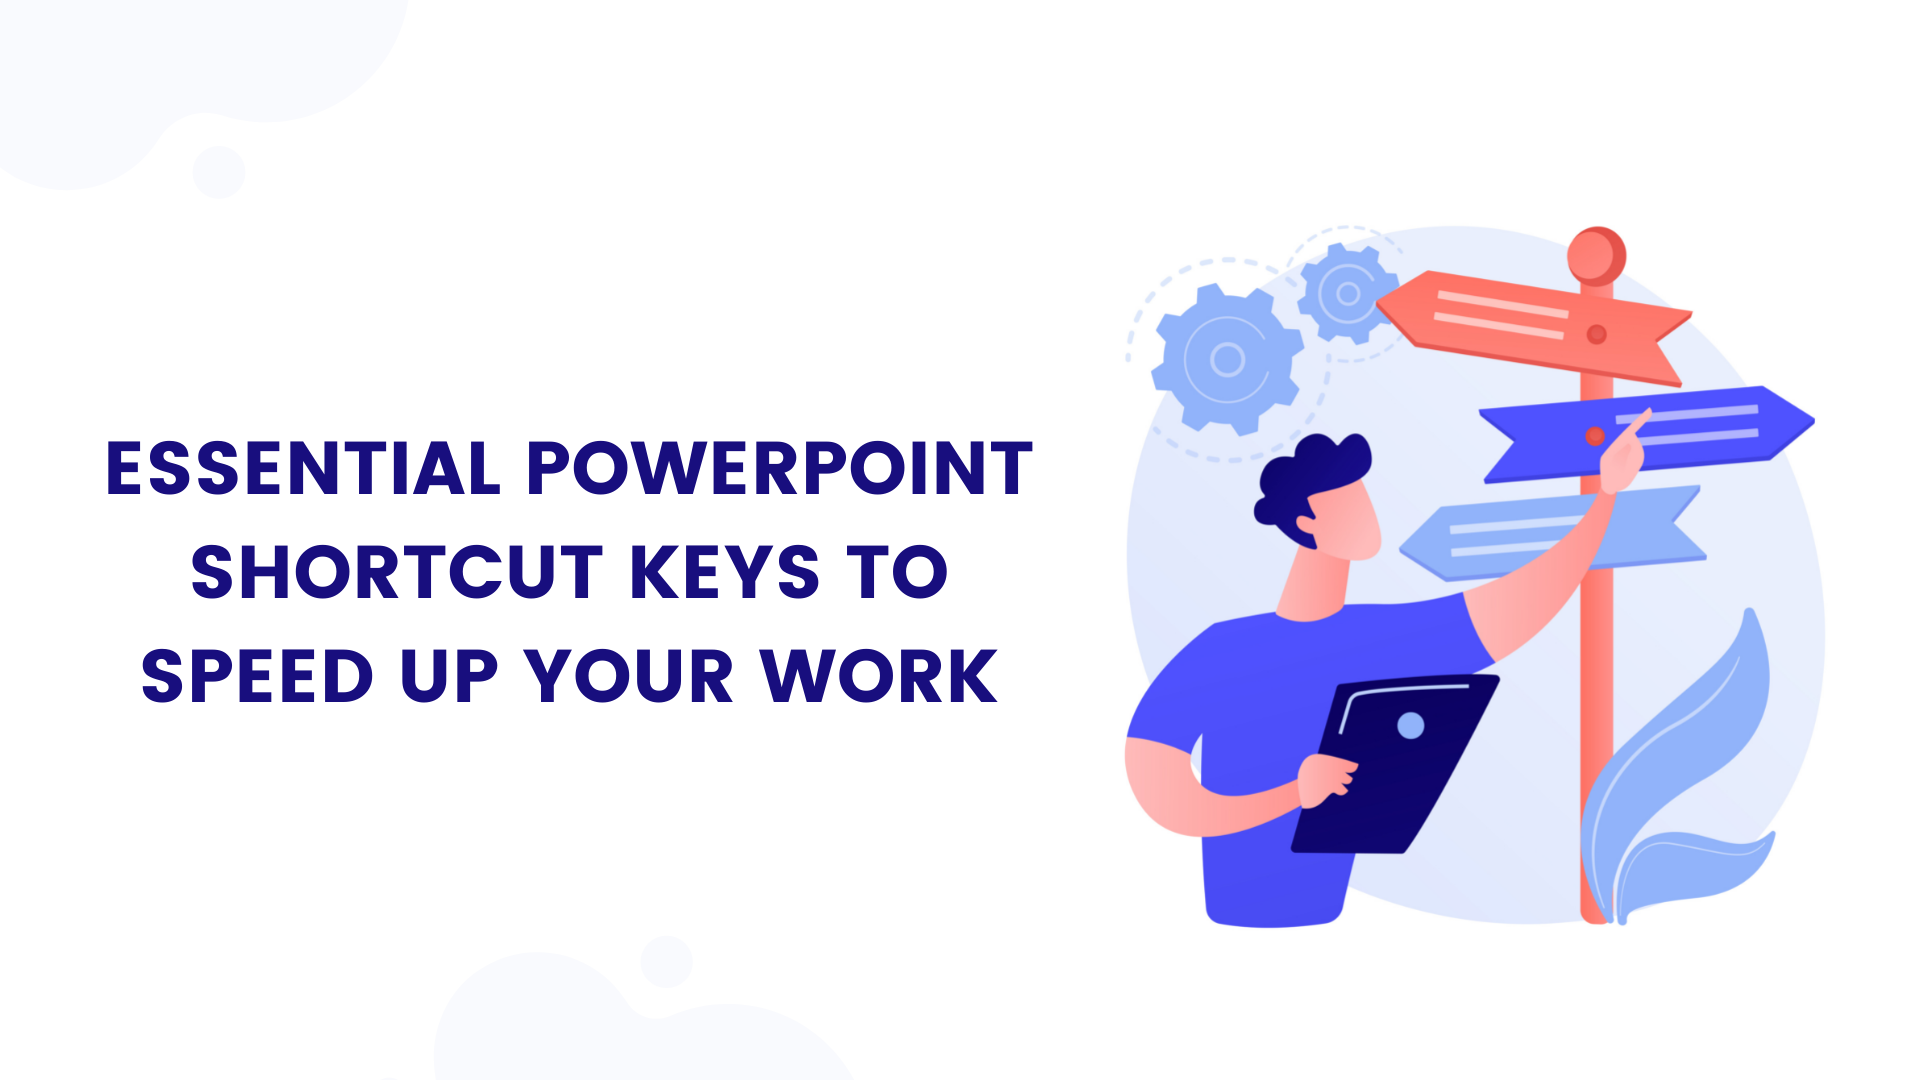 Essential PowerPoint shortcut keys to speed up your work